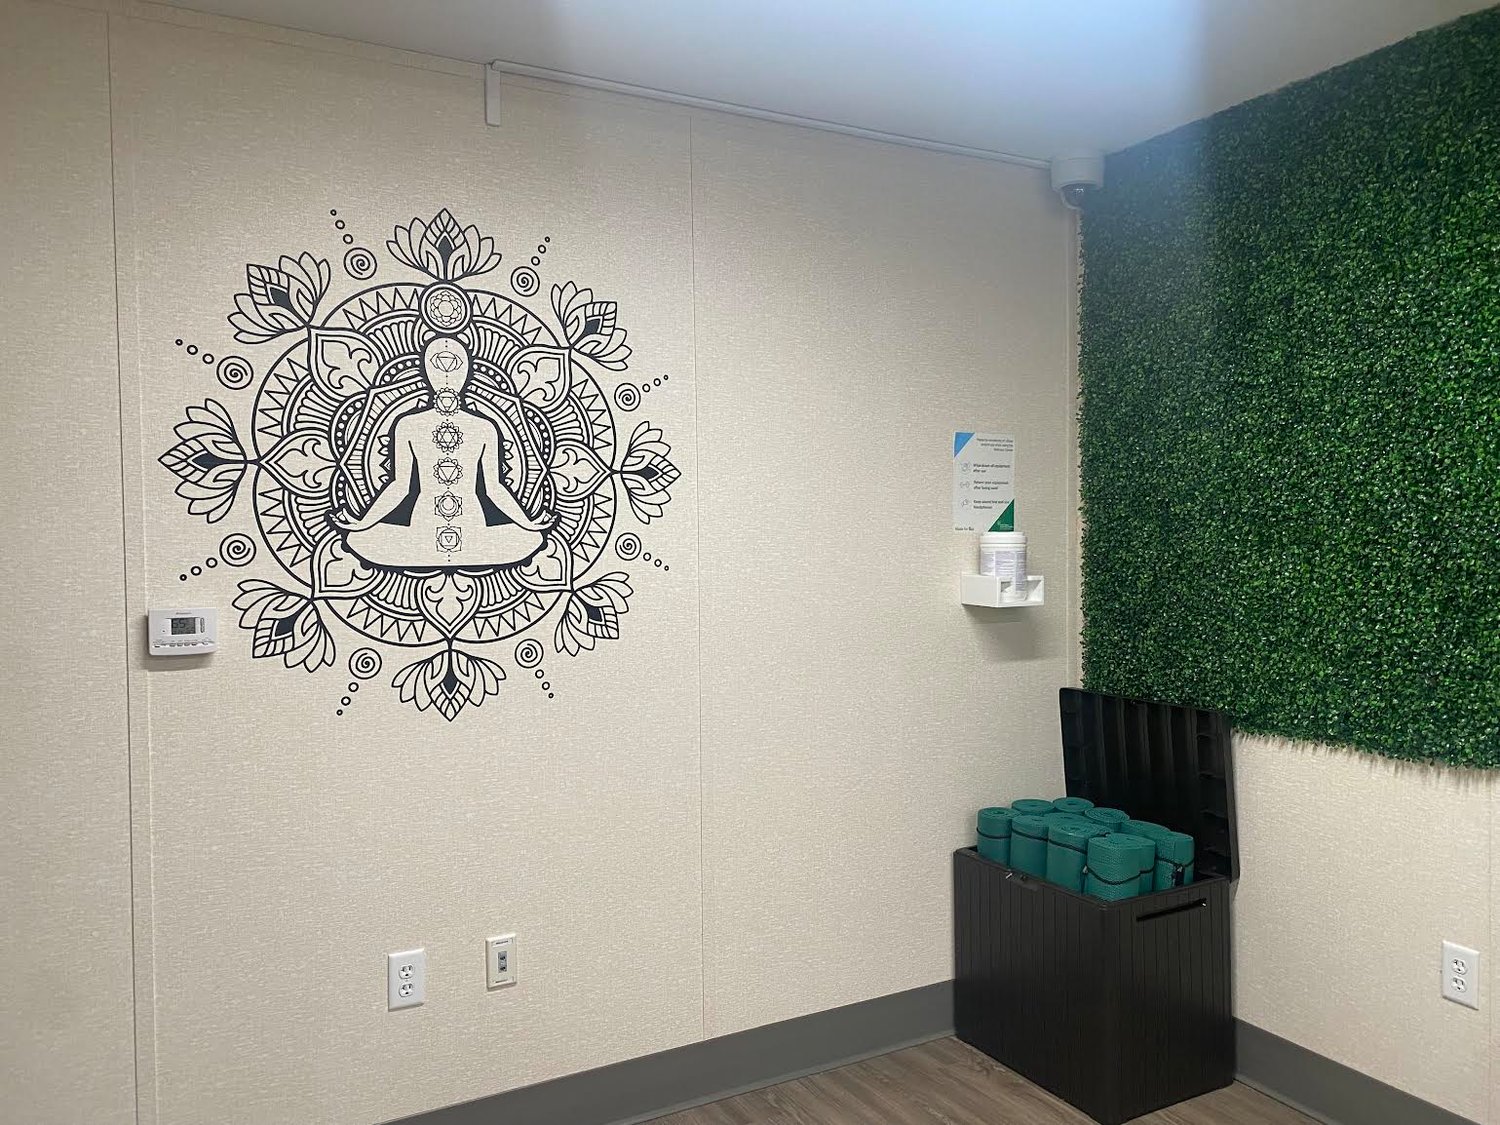 The new employee wellness center features a yoga studio with mats and blocks for employees to utilize.